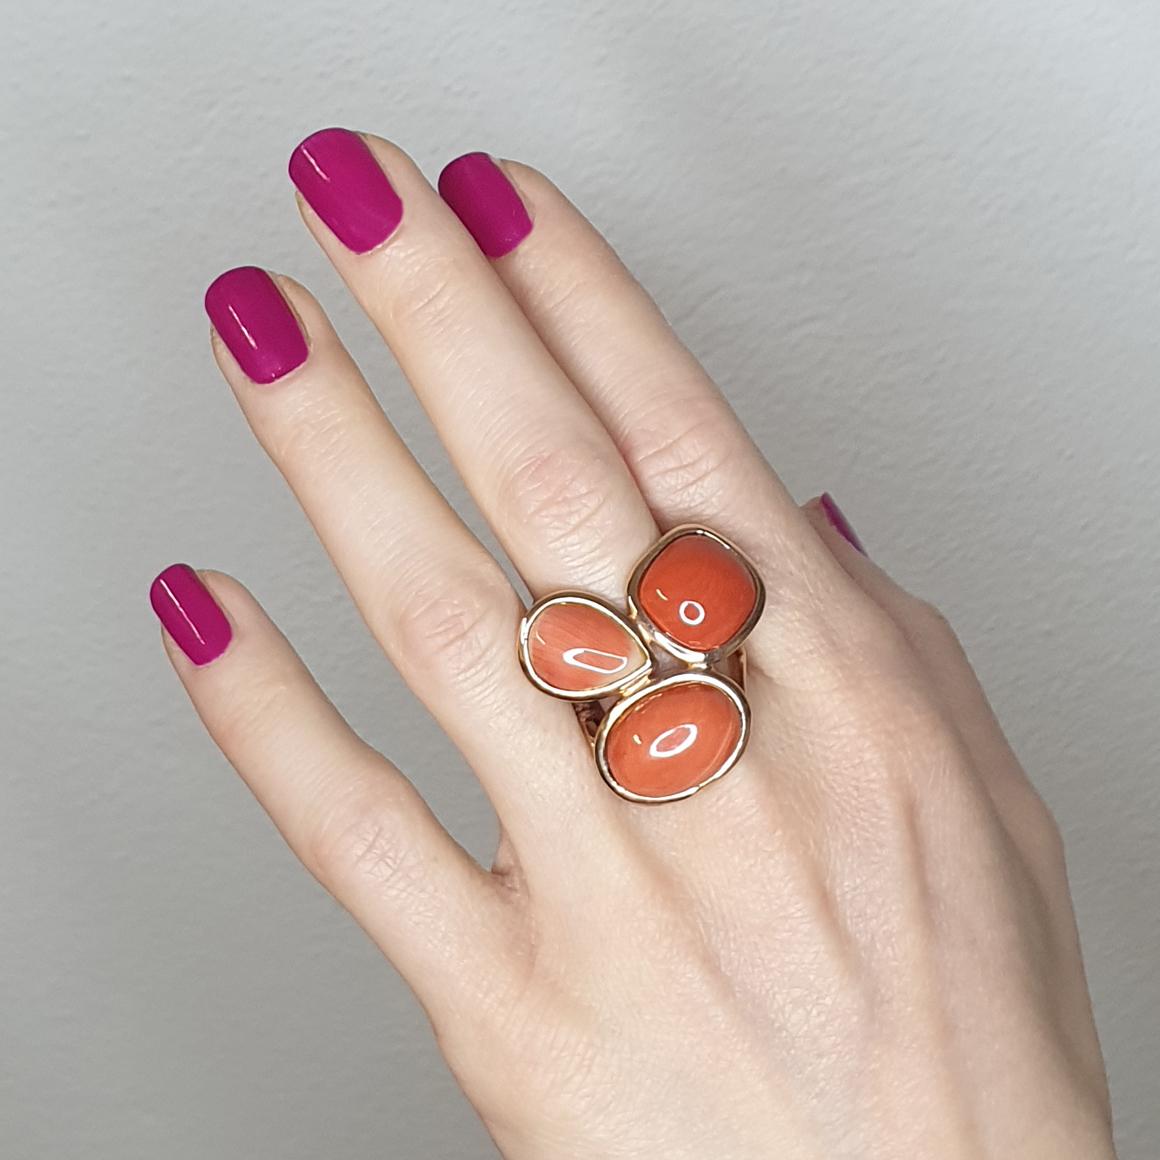  Combination of shapes and red color made a unique fashion and modern ring in 14k rose gold with Red Coral. Made in Italy by Stanoppi Jewellery since 1948.

(square cabochon cut, size: 13x13 mm; Oval cabochon cut, size: 12x16 mm, drop 10x14)  